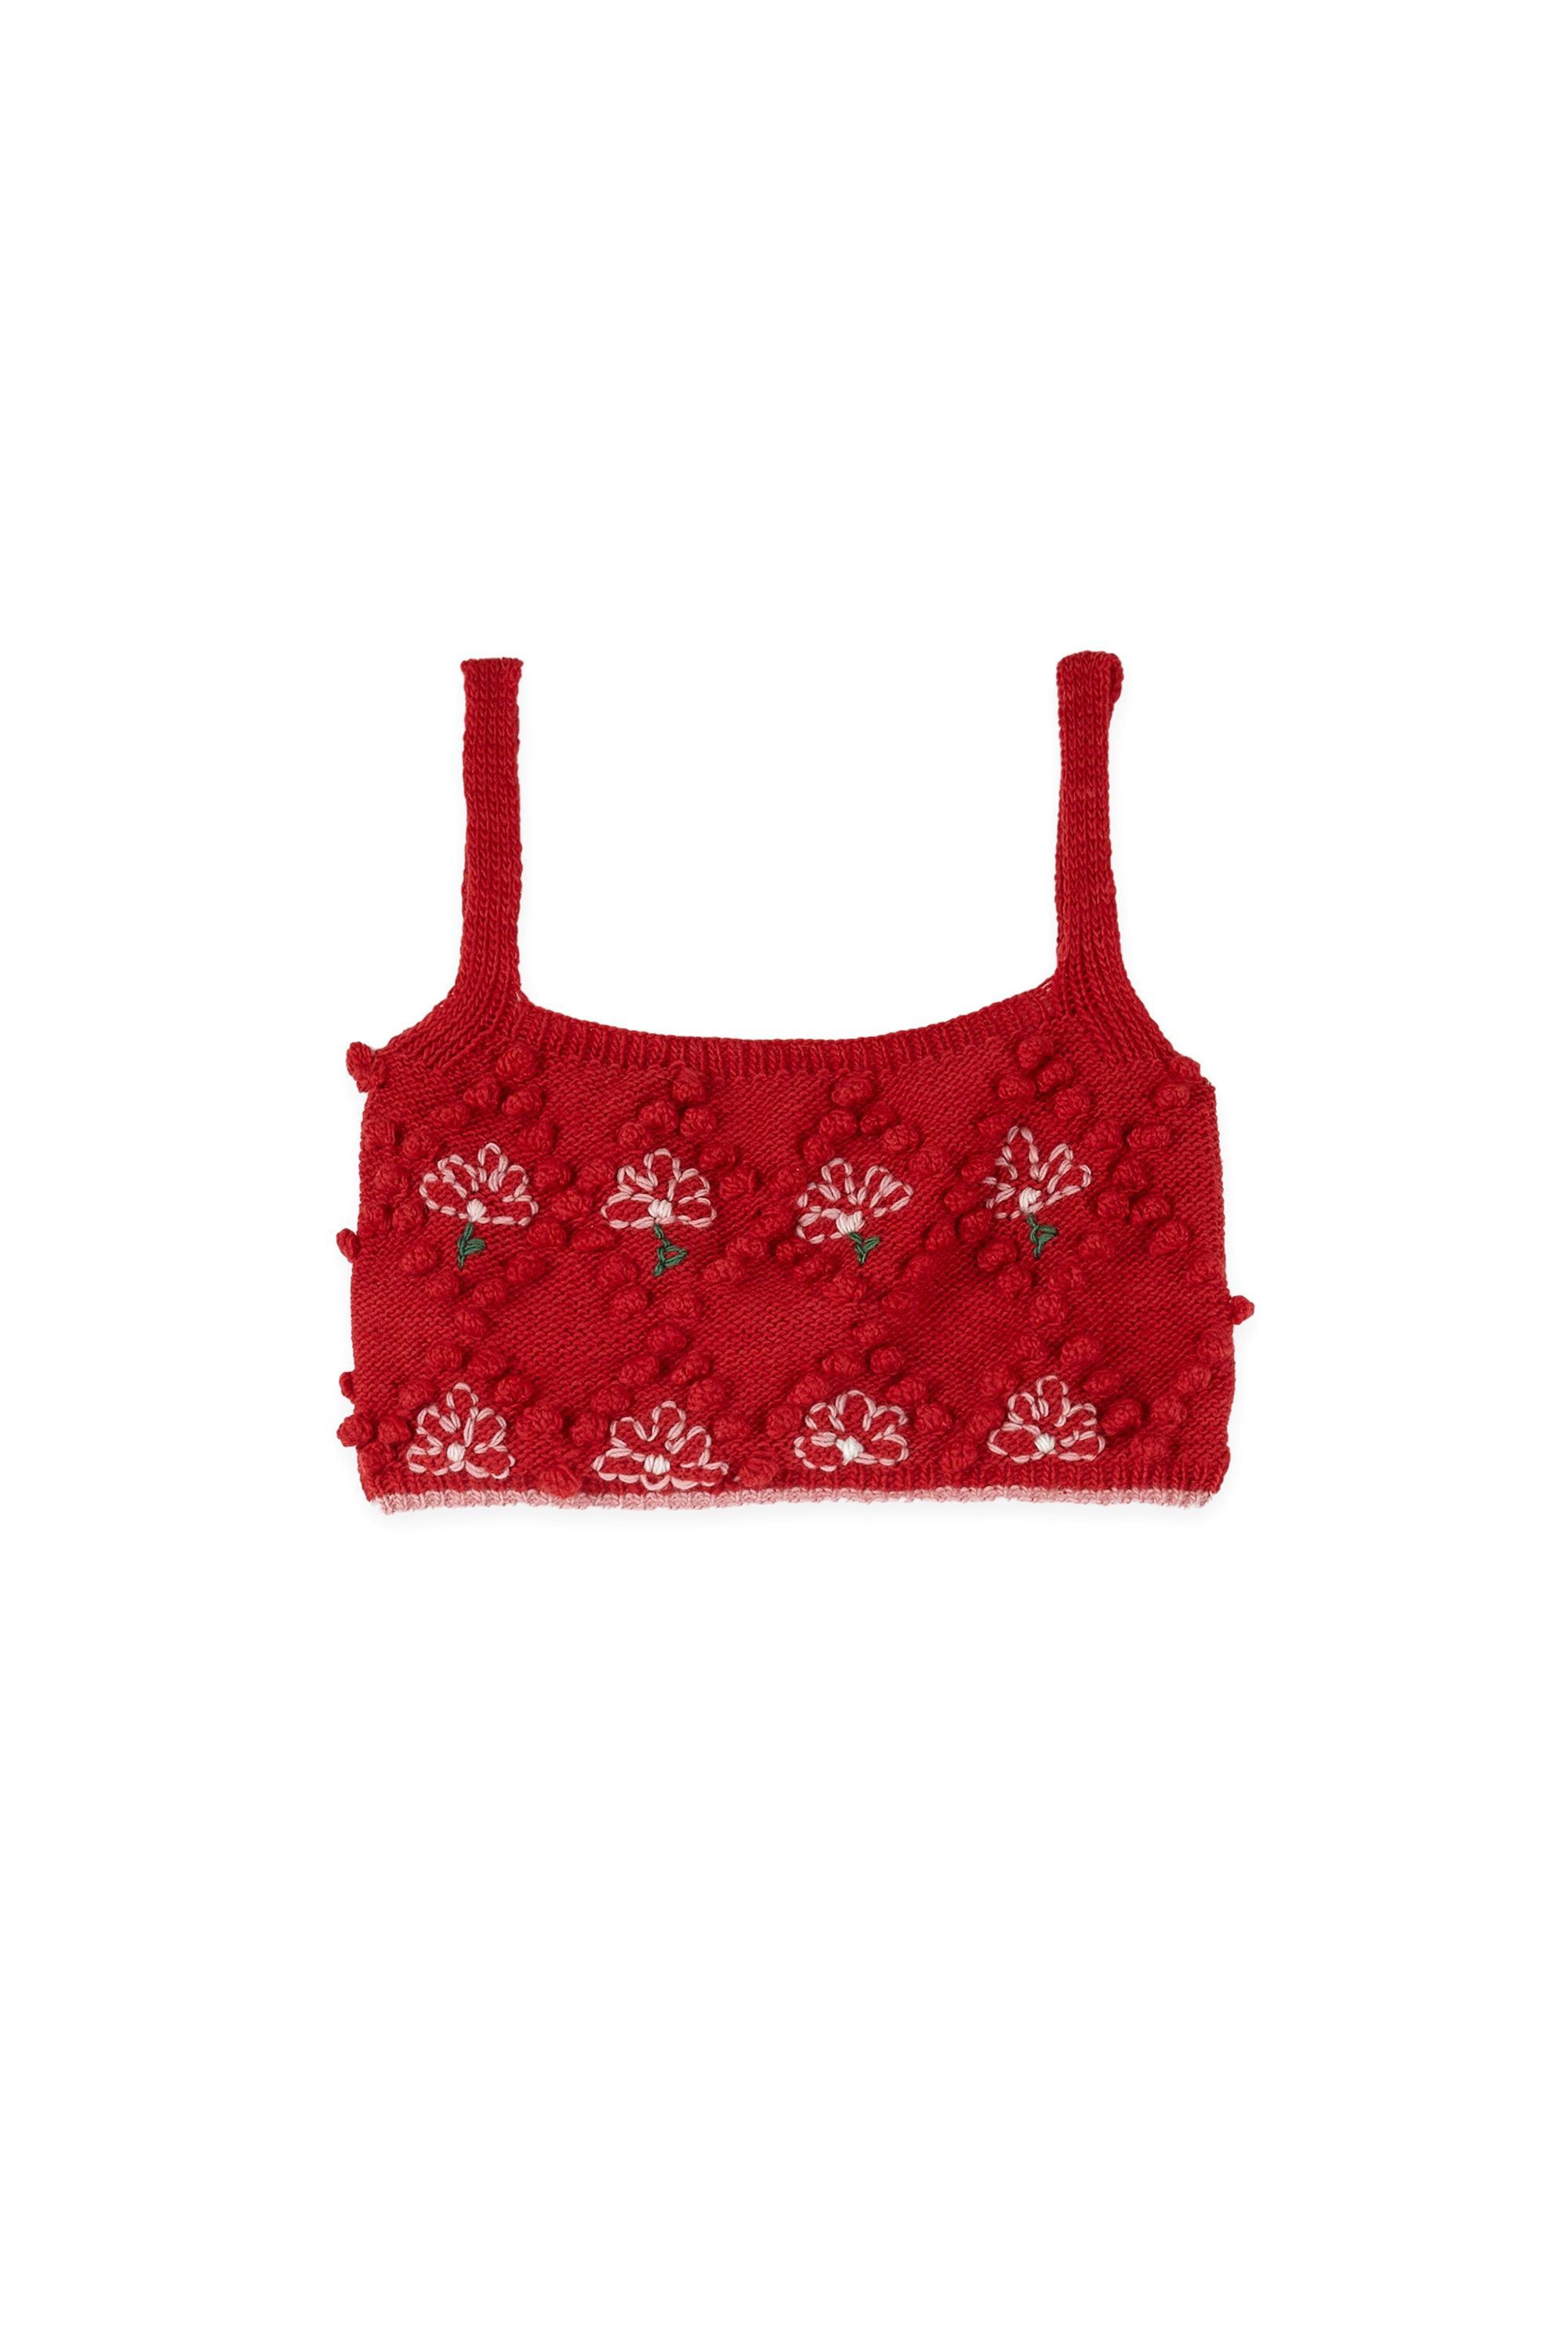 Amadea Top Red (Pre Order 25 days)